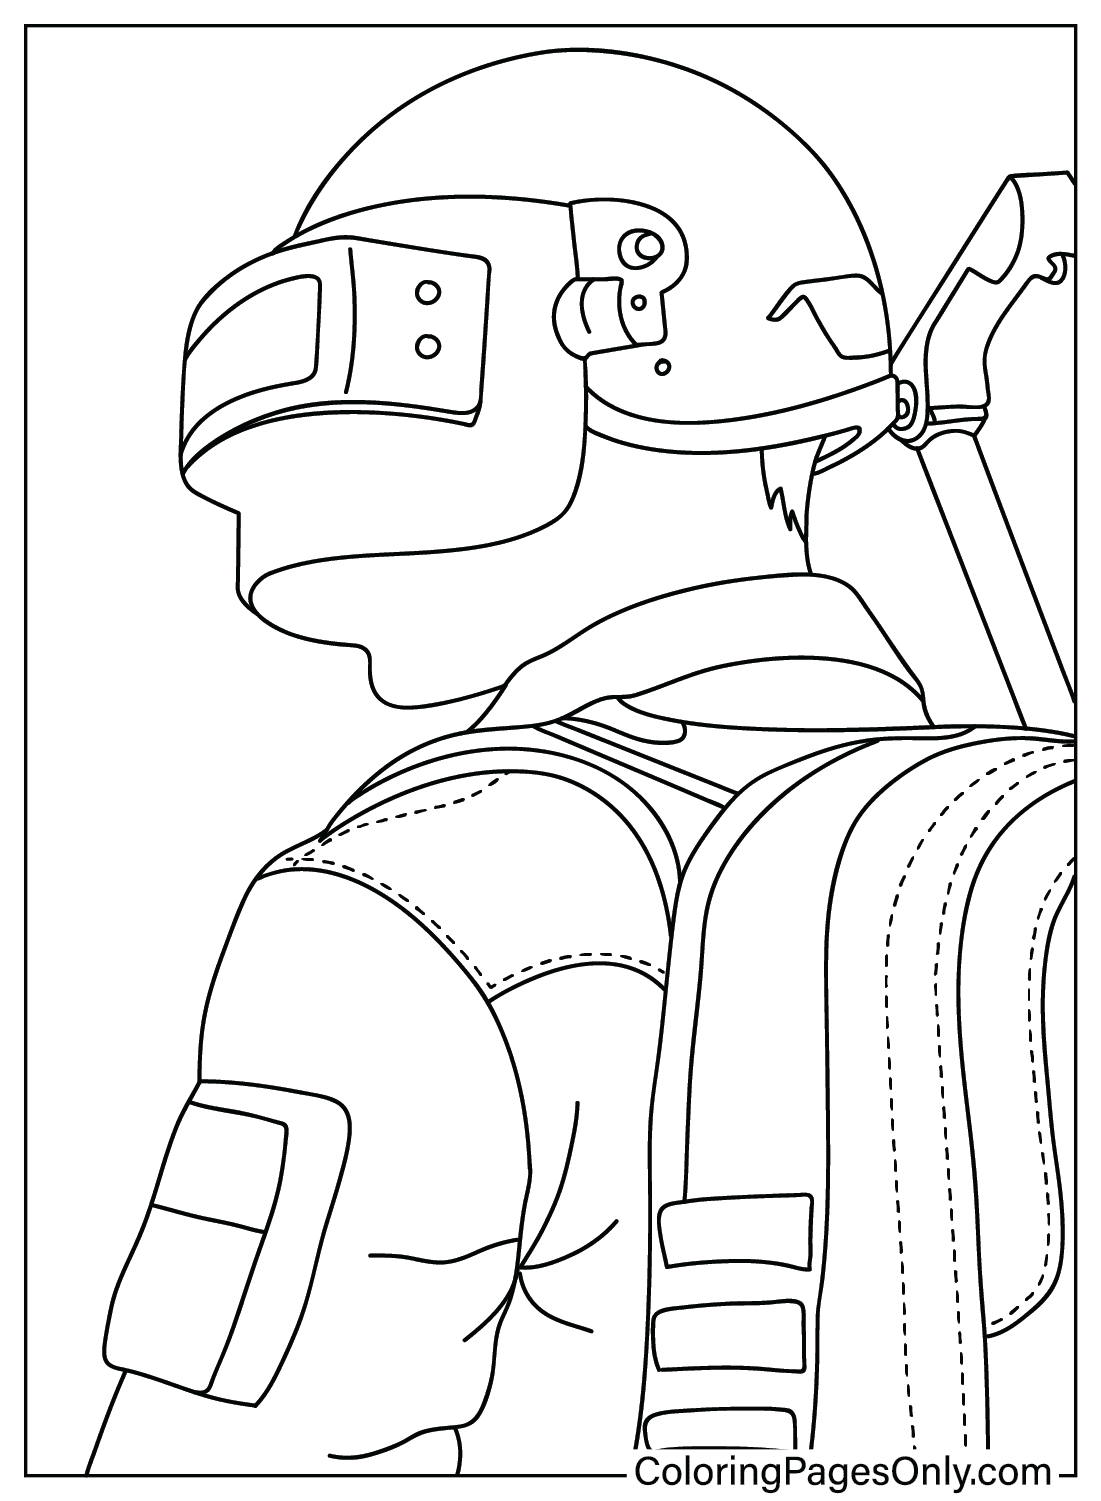 Pubg Coloring Pages to Printable from PUBG